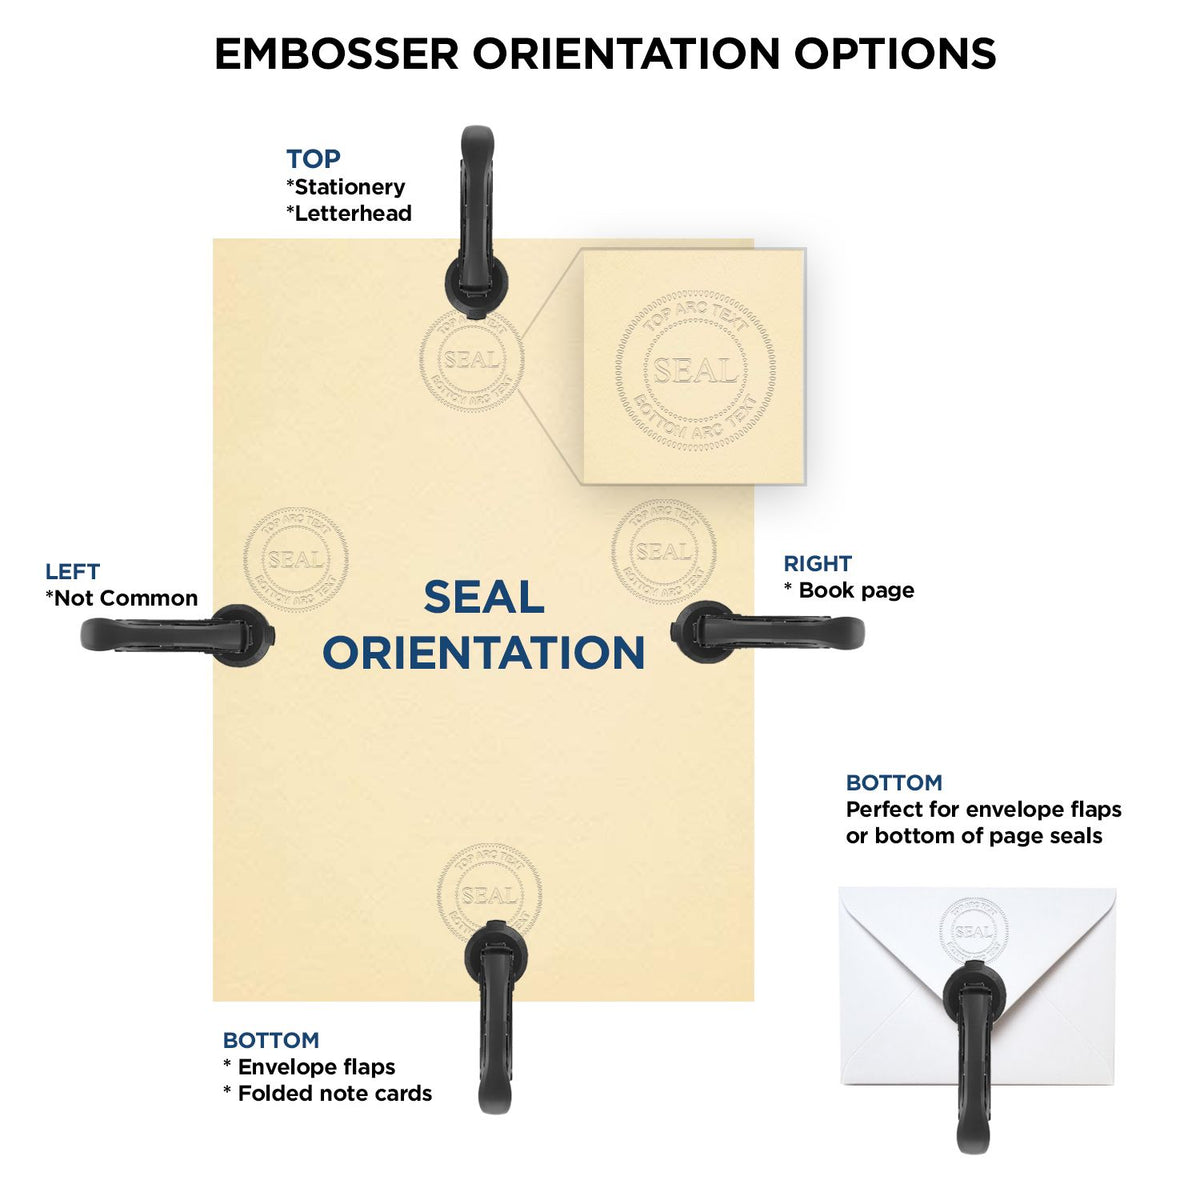 An infographic for the Heavy Duty Cast Iron Pennsylvania Architect Embosser showing embosser orientation, this is showing examples of a top, bottom, right and left insert.